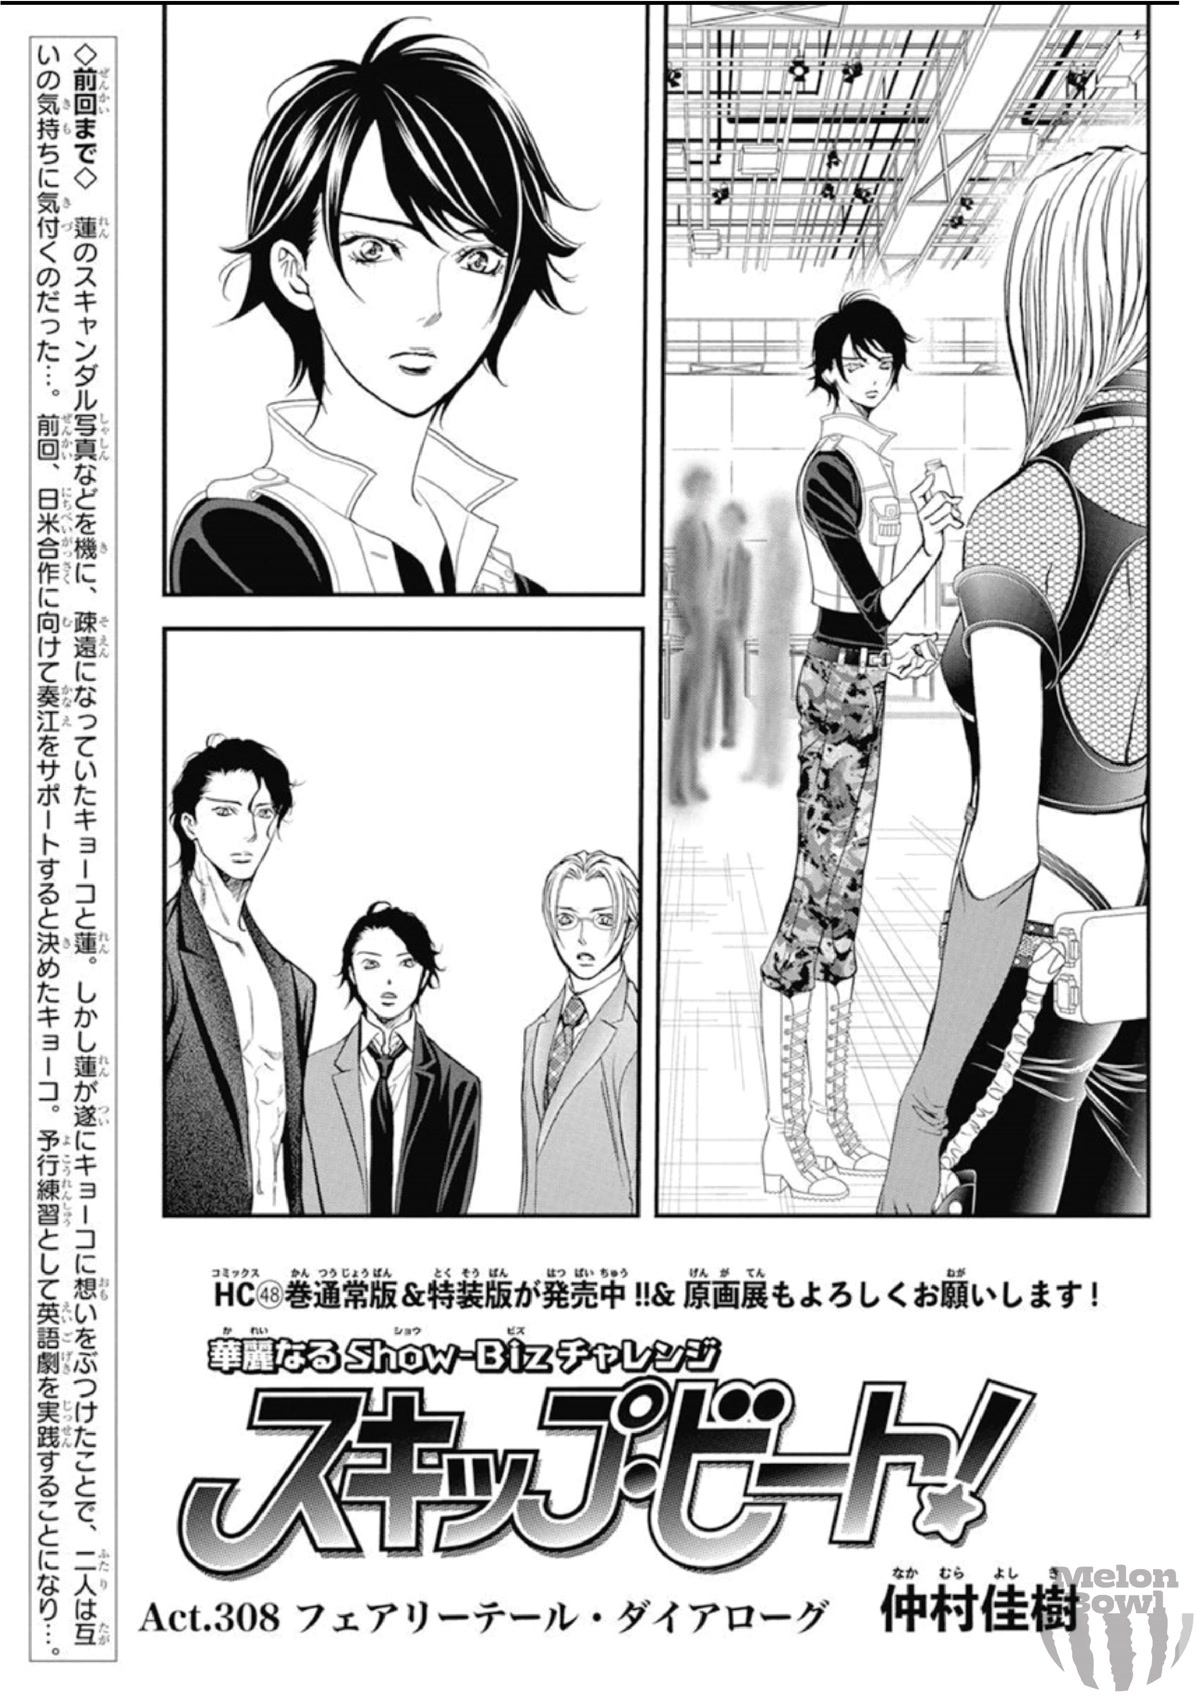 Skip Beat!, Chapter 308 Fairytale Dialogue image 02